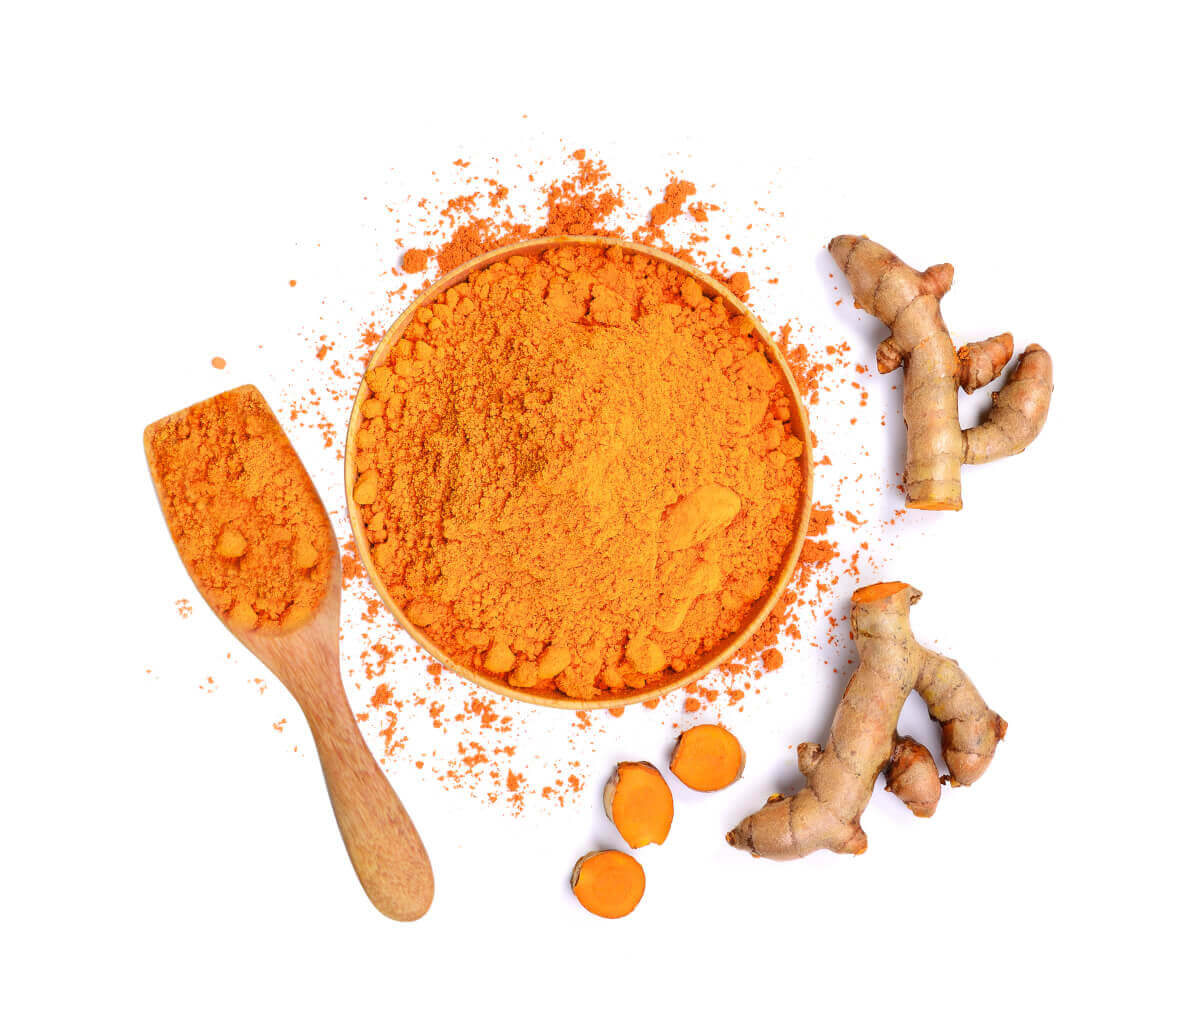 pieces of turmeric and bowl of powdered turmeric